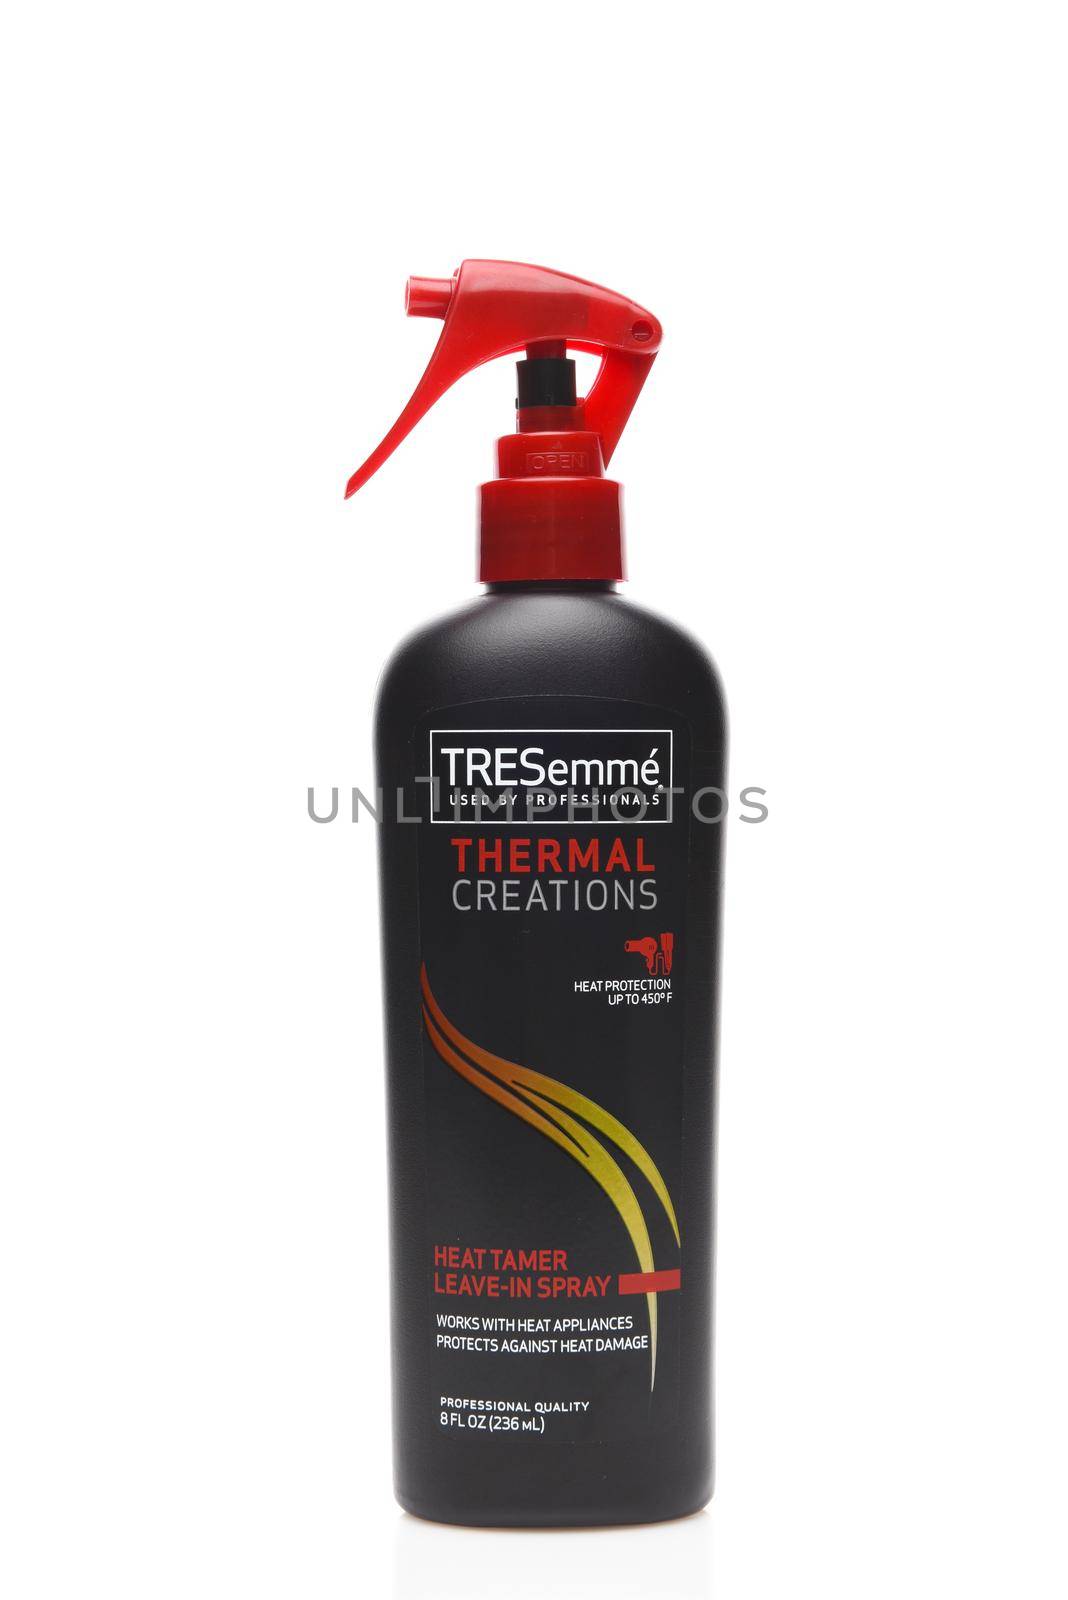 IRVINE, CALIFORNIA - AUGUST 20, 2019: A spray bottle of TRESemme Thermal Creations Heat Tamer Leave-in Spray by sCukrov